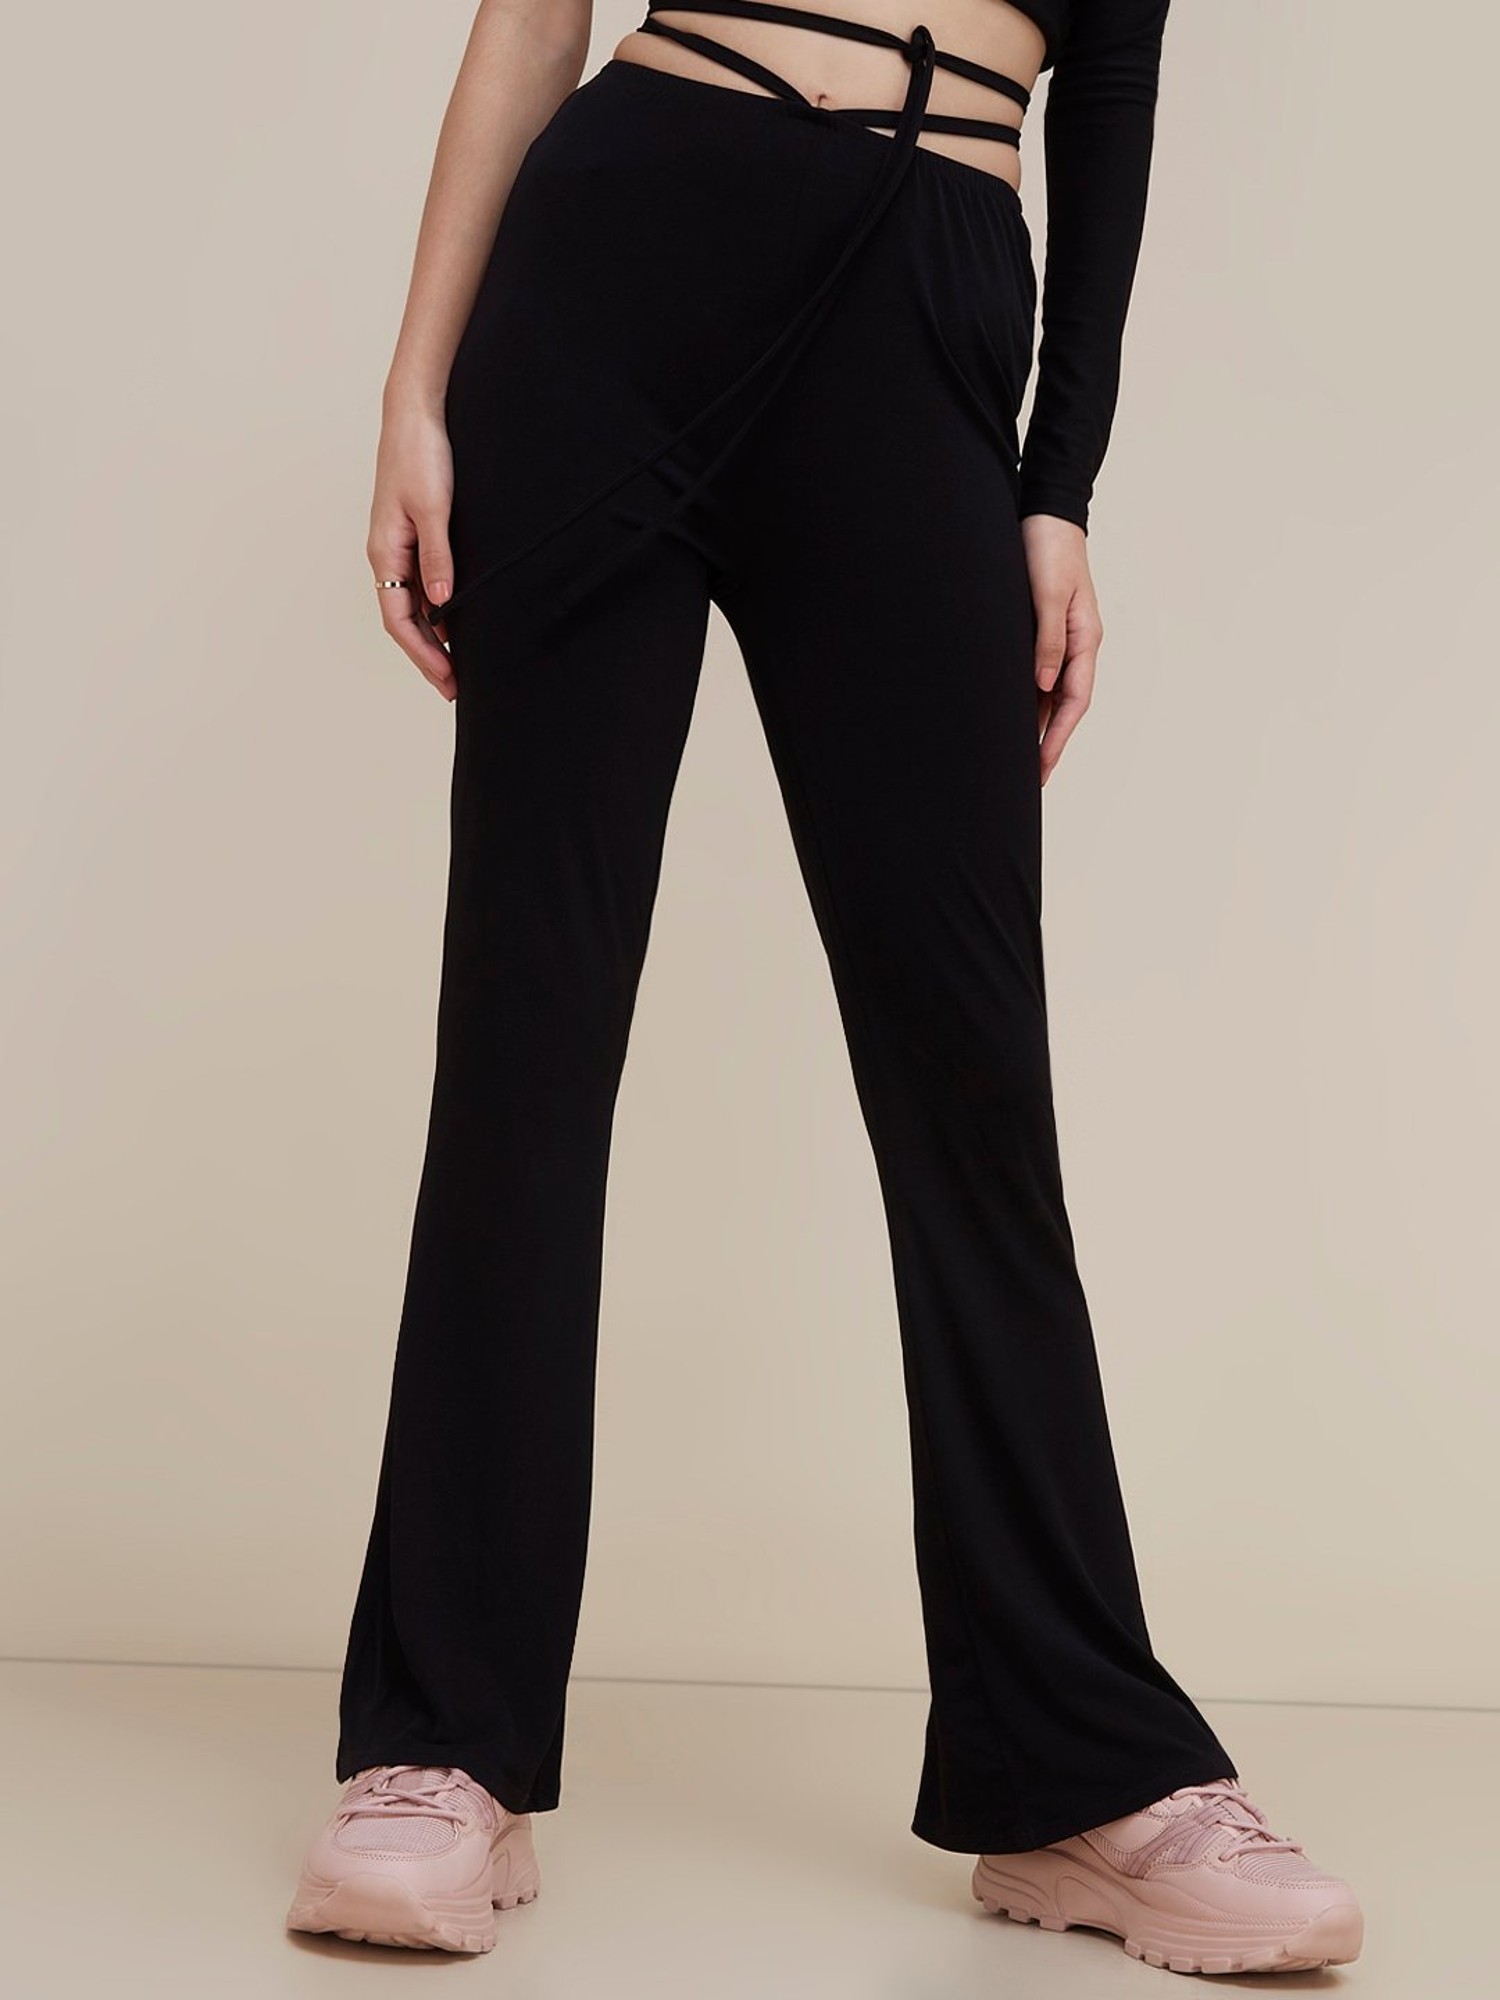 Discover 81+ high waisted bell bottom trousers latest - in.cdgdbentre